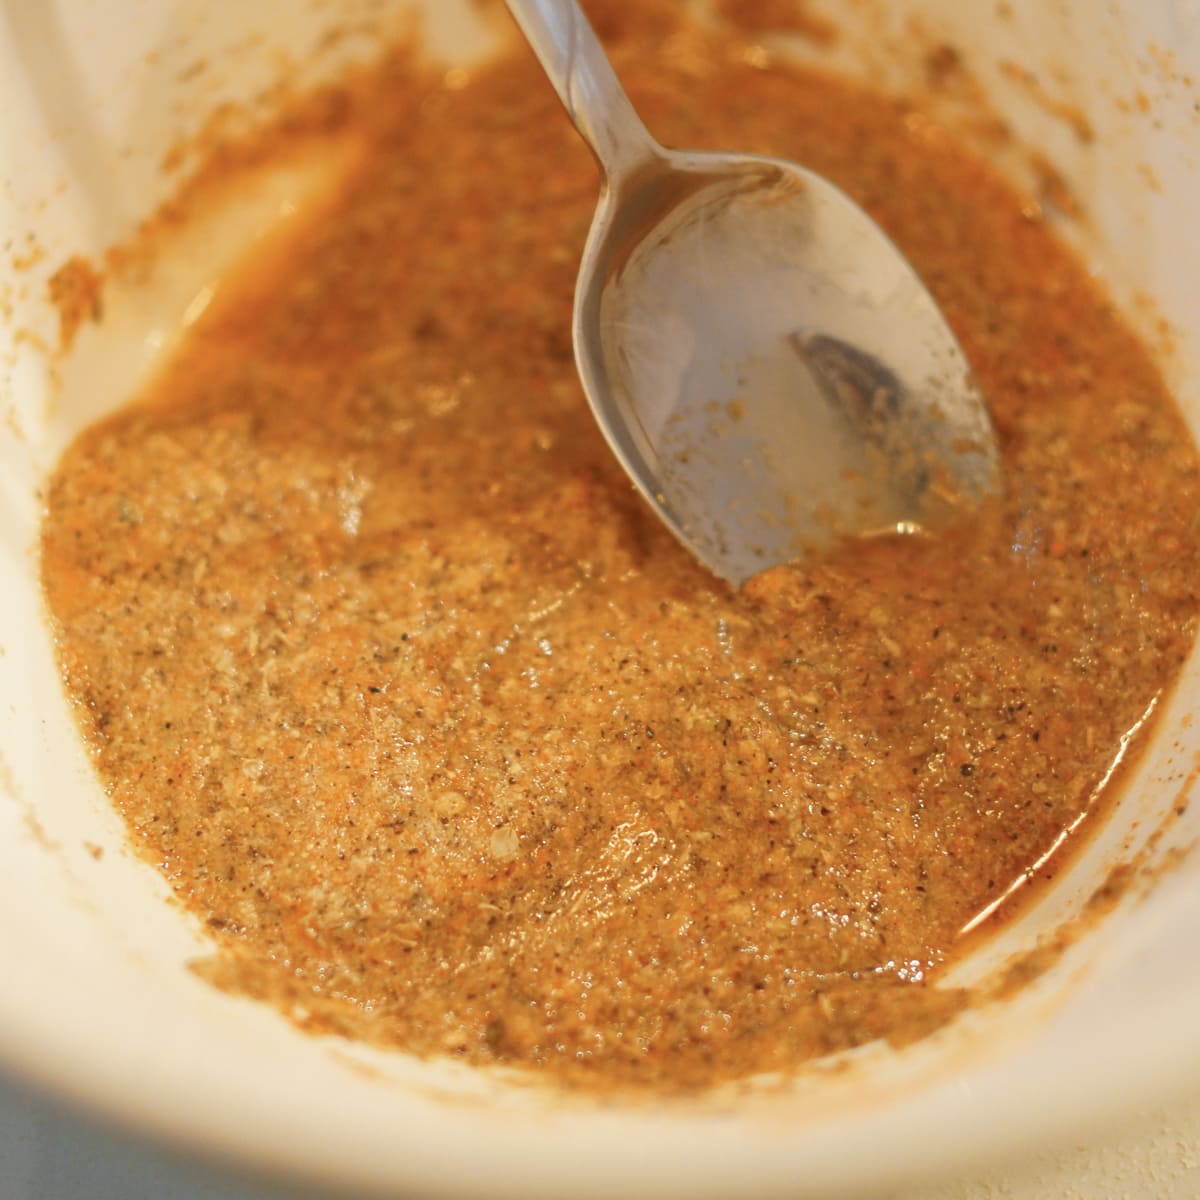 Spices mixed with water in a bowl.